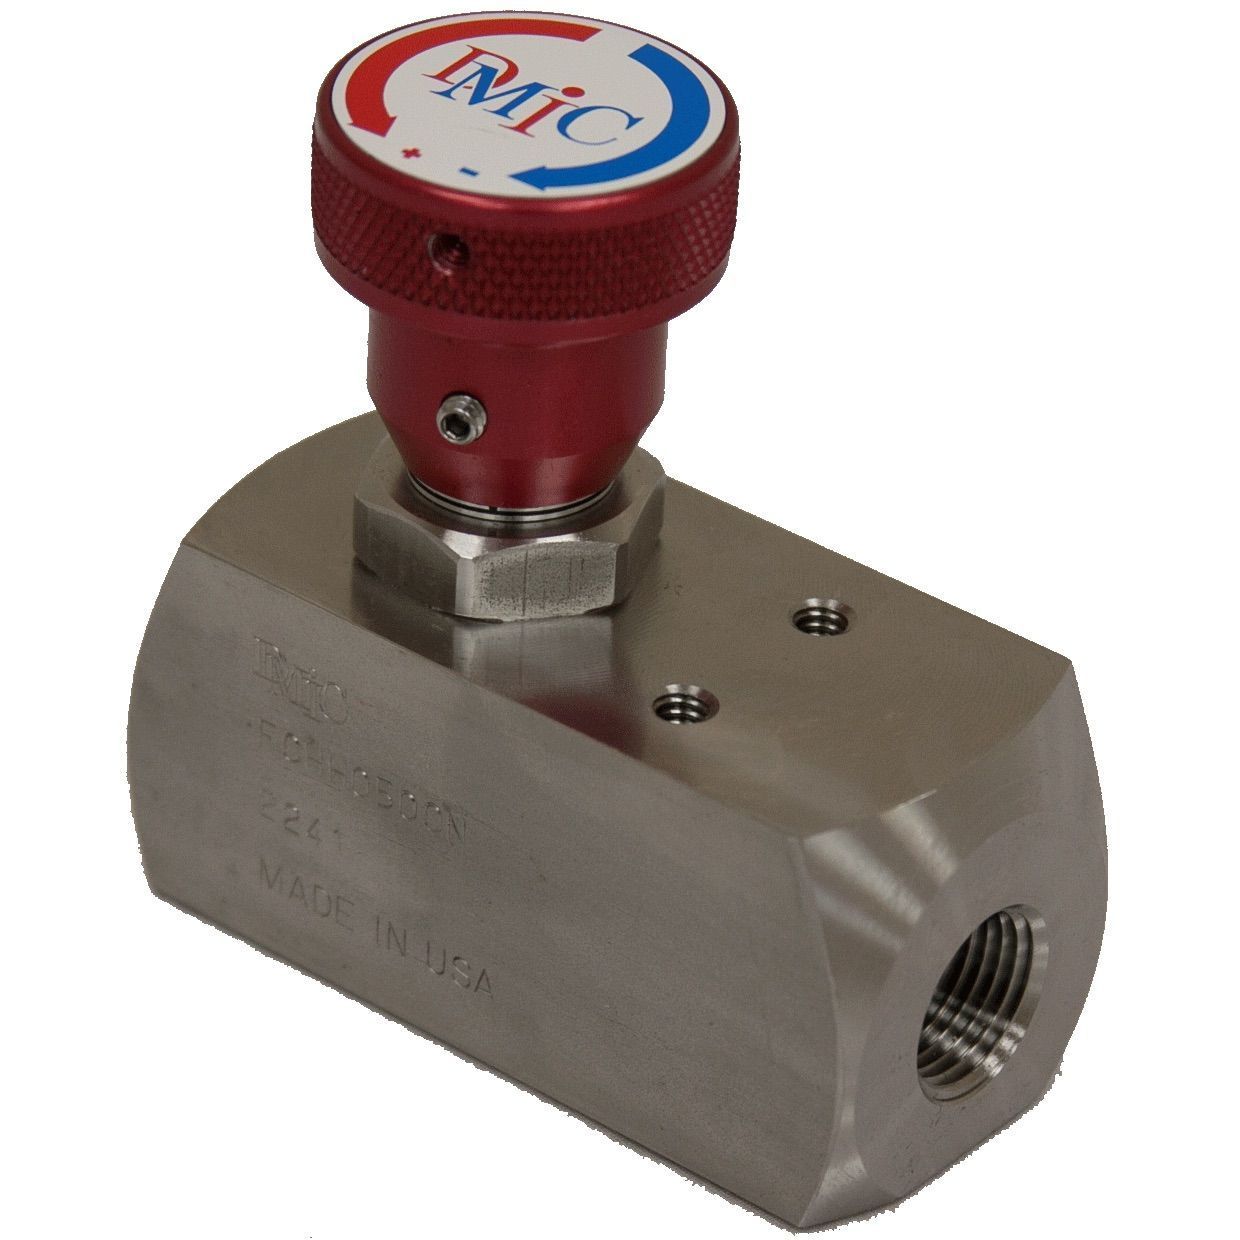 FCHH-1500S-1141 : DMIC Flow Control, Unidirectional, with Integrated Check, #24 SAE (1.5"), Carbon Steel, 10000psi